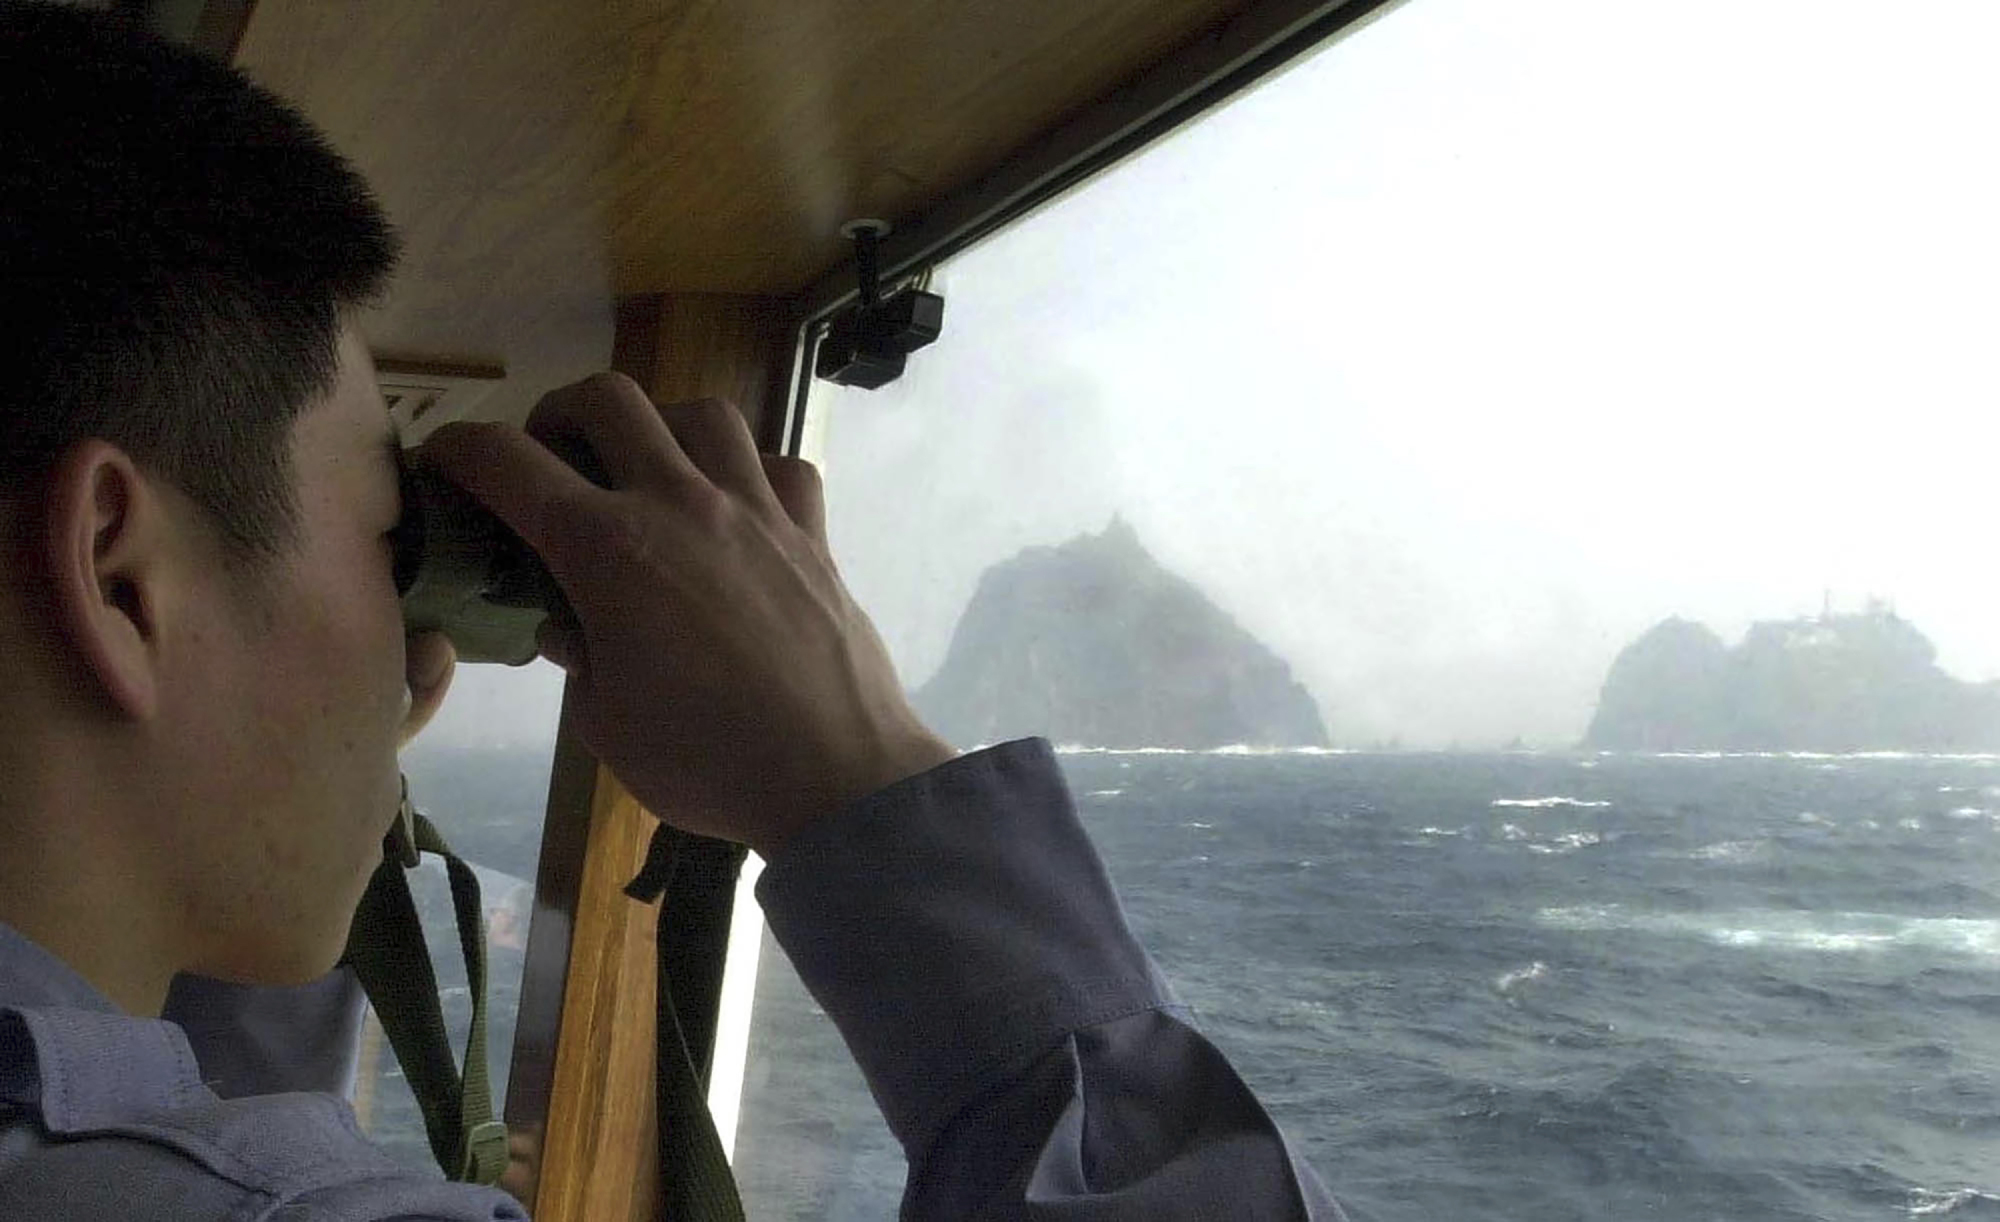 A member of the South Korean Coast Guard looks at the Takeshima islets, known in the South as Dokdo, aboard a patrol ship in the Sea of Japan in April 2005. South Korean jets fired warning shots after a Russian military plane violated South Korea's airspace on Tuesday, Seoul officials said, in the first such incident between the countries. | AP